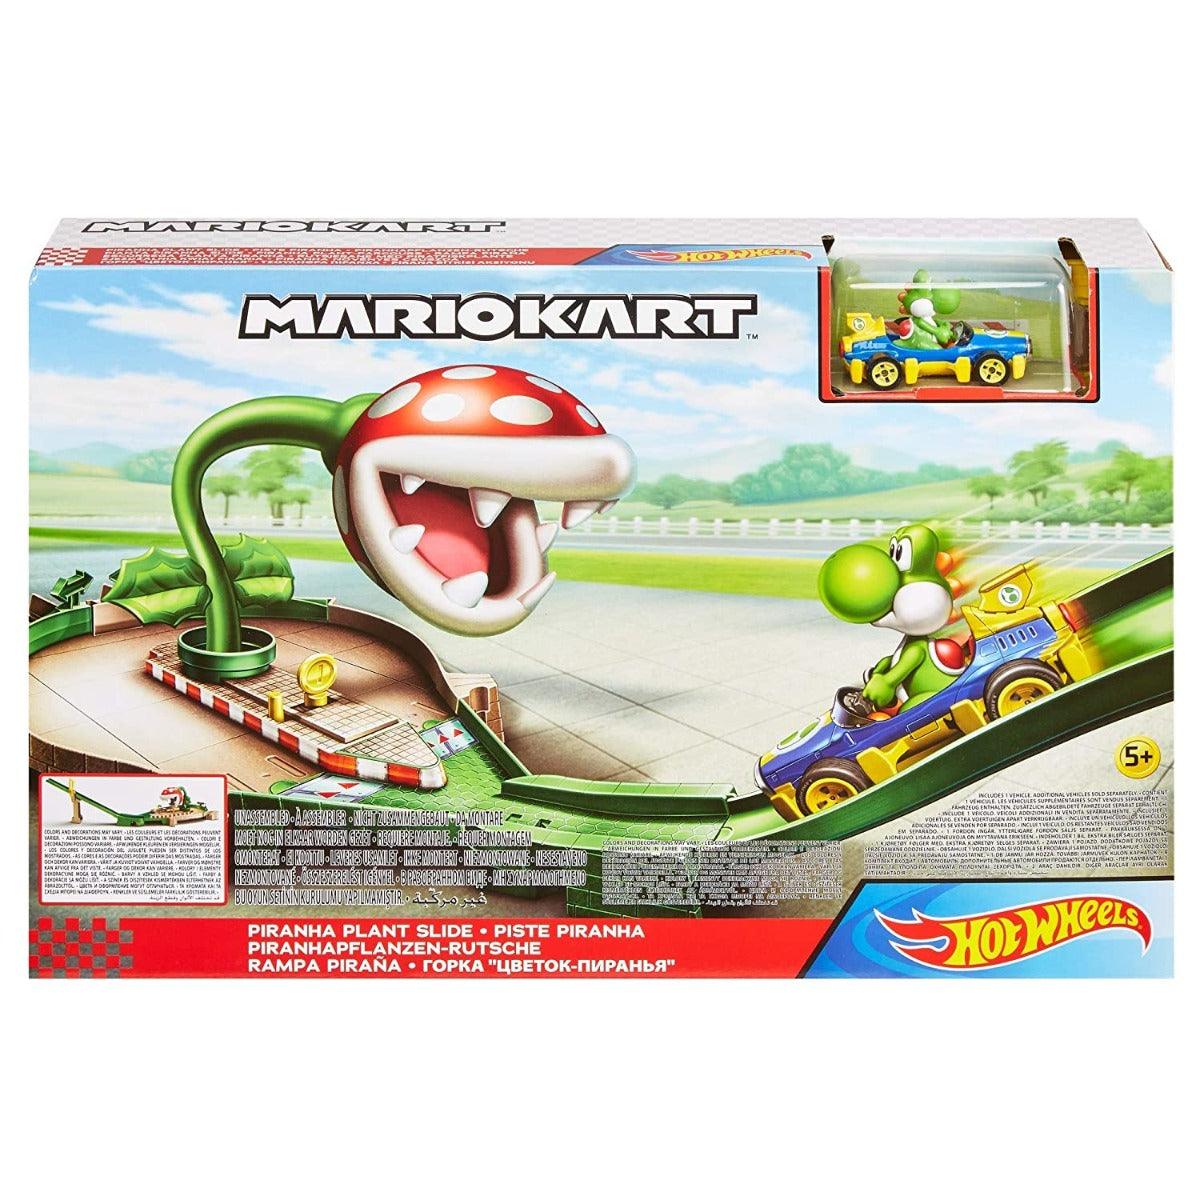  Hot Wheels Mario Kart Circuit Track Set with 1:64 Scale  DIE-CAST Kart Replica Ages 3 and Above : Toys & Games